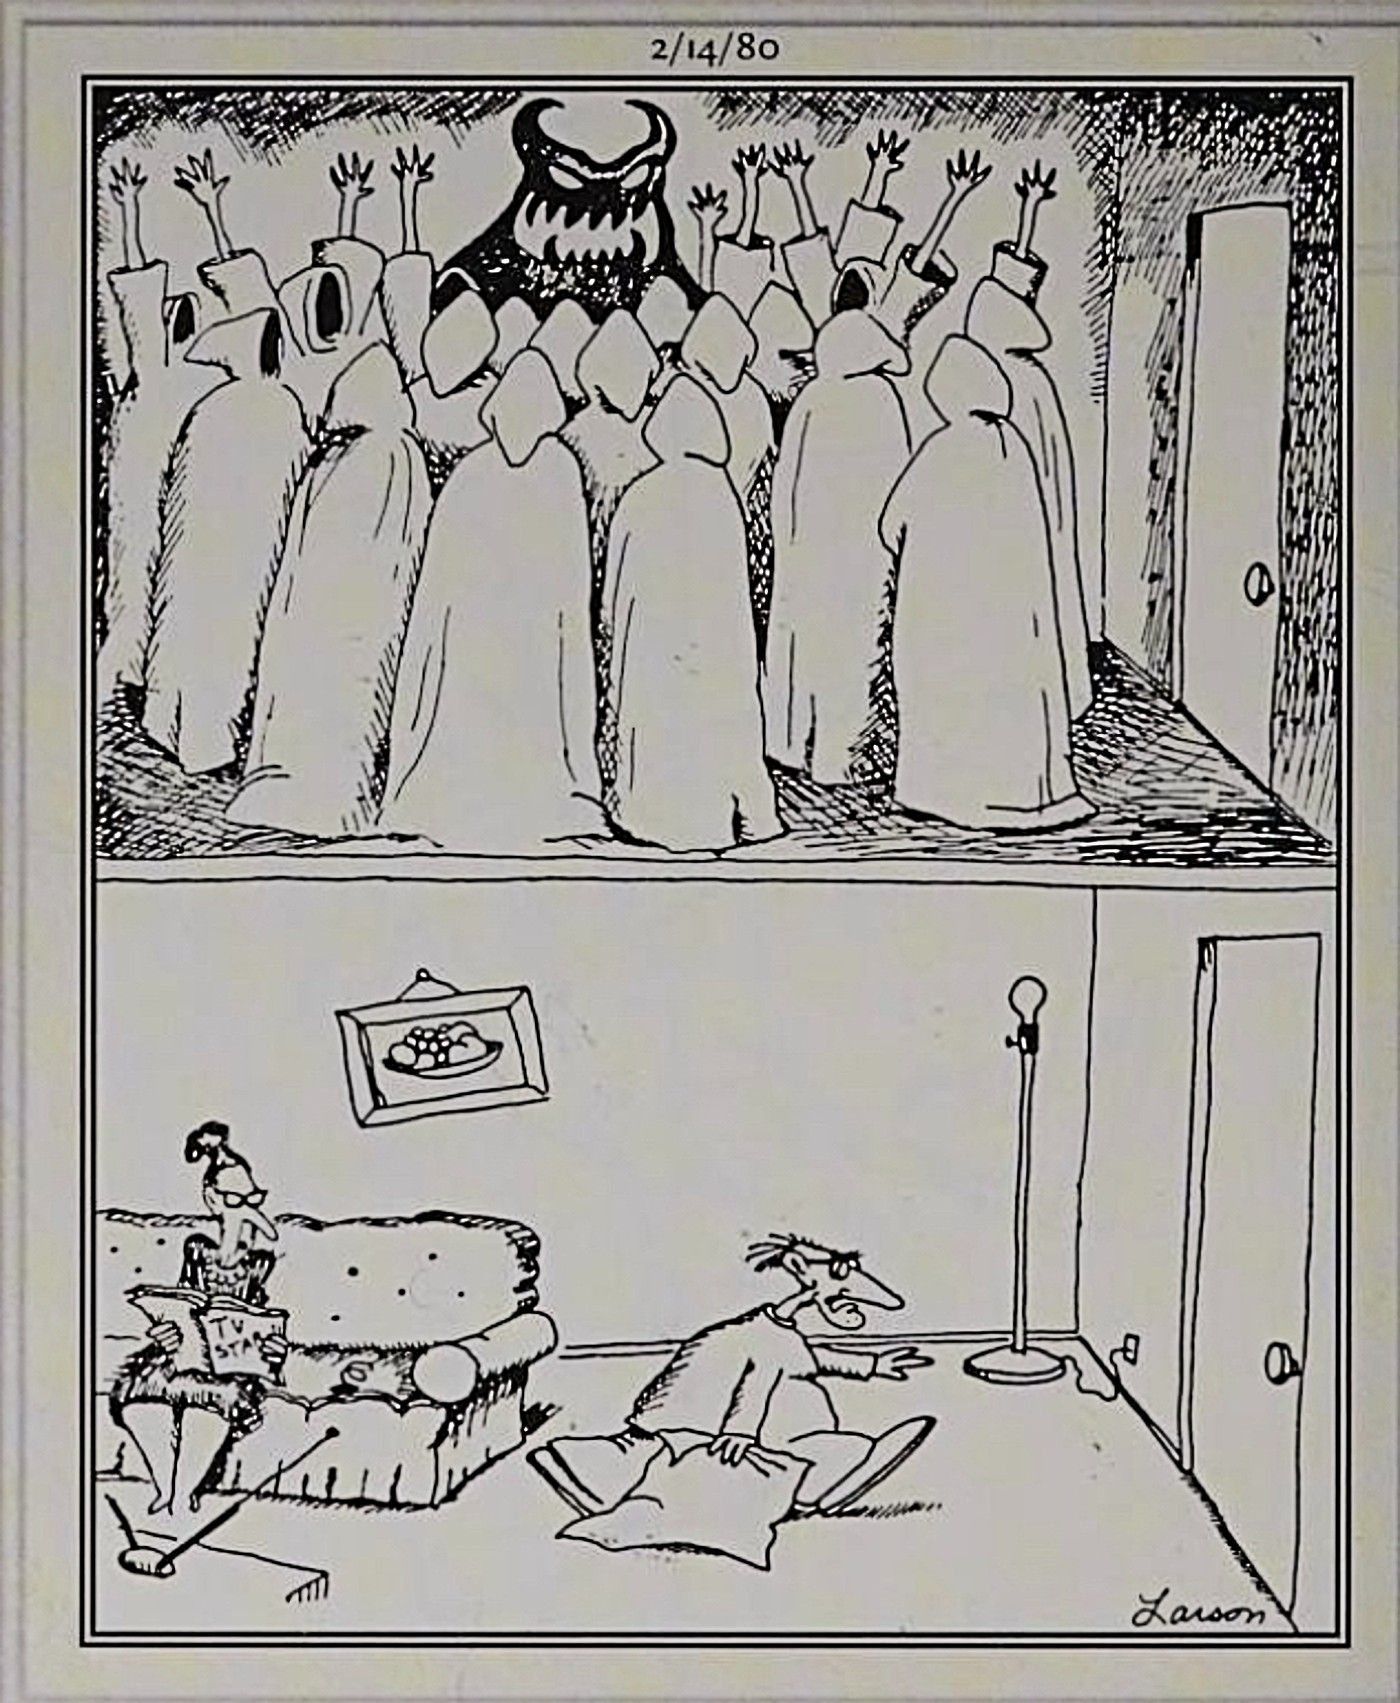 Far Side, downstairs neighbor about to interrupt a demon summoning in the apartment above.